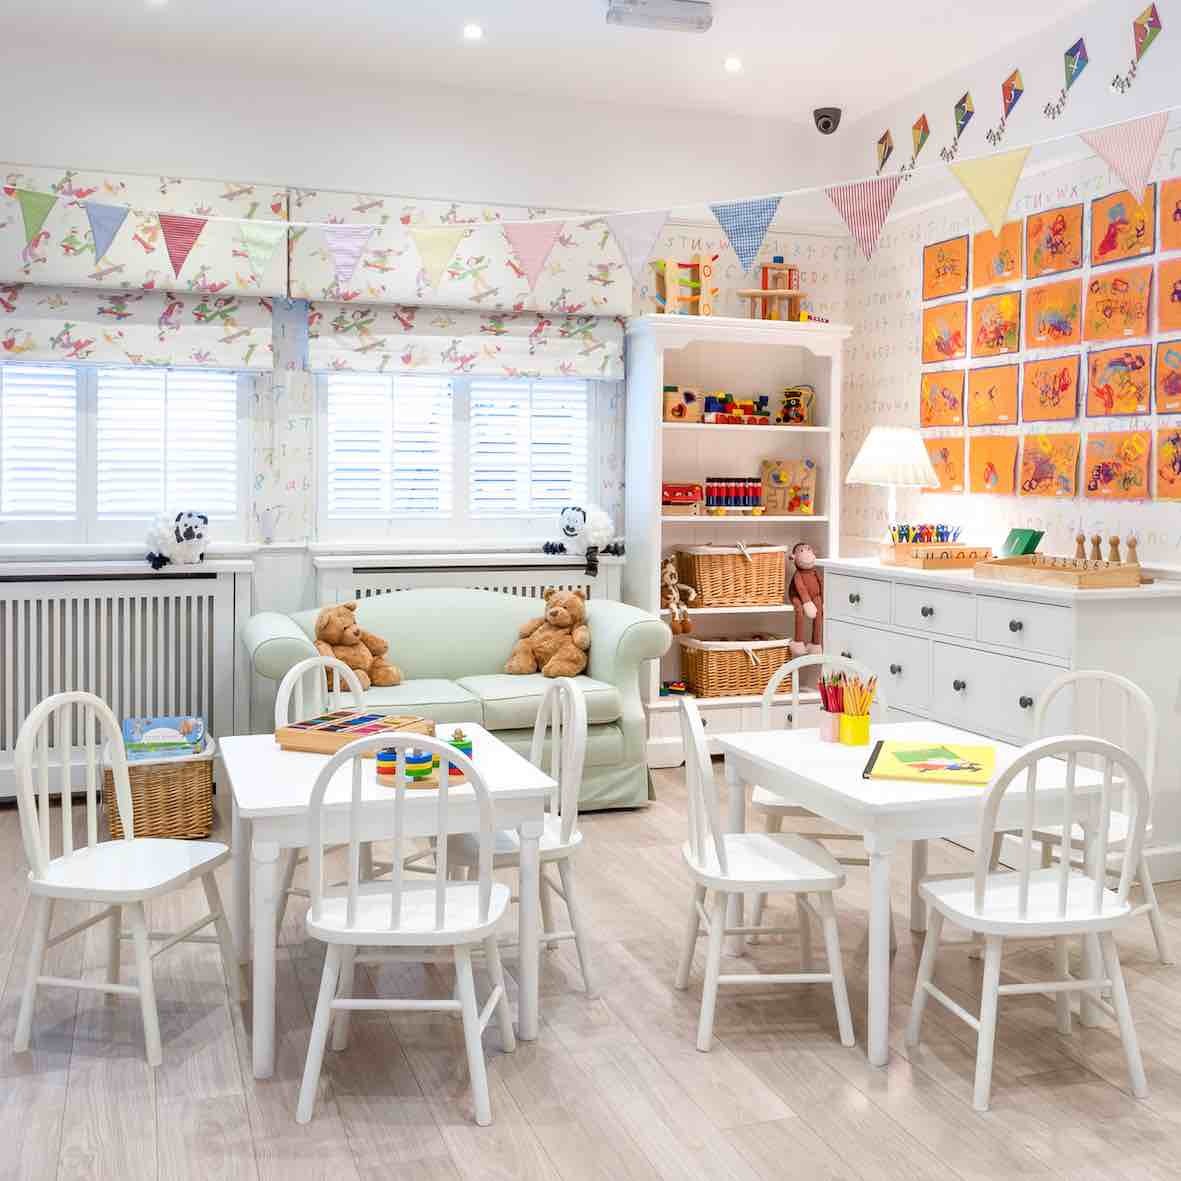 We are proud to announce the addition of Pippa Pop-ins, a group of four nursery schools in London known for providing exceptional early childhood learning, to our Little Dukes family of independent nurseries. Read more: bit.ly/3vKh2dY